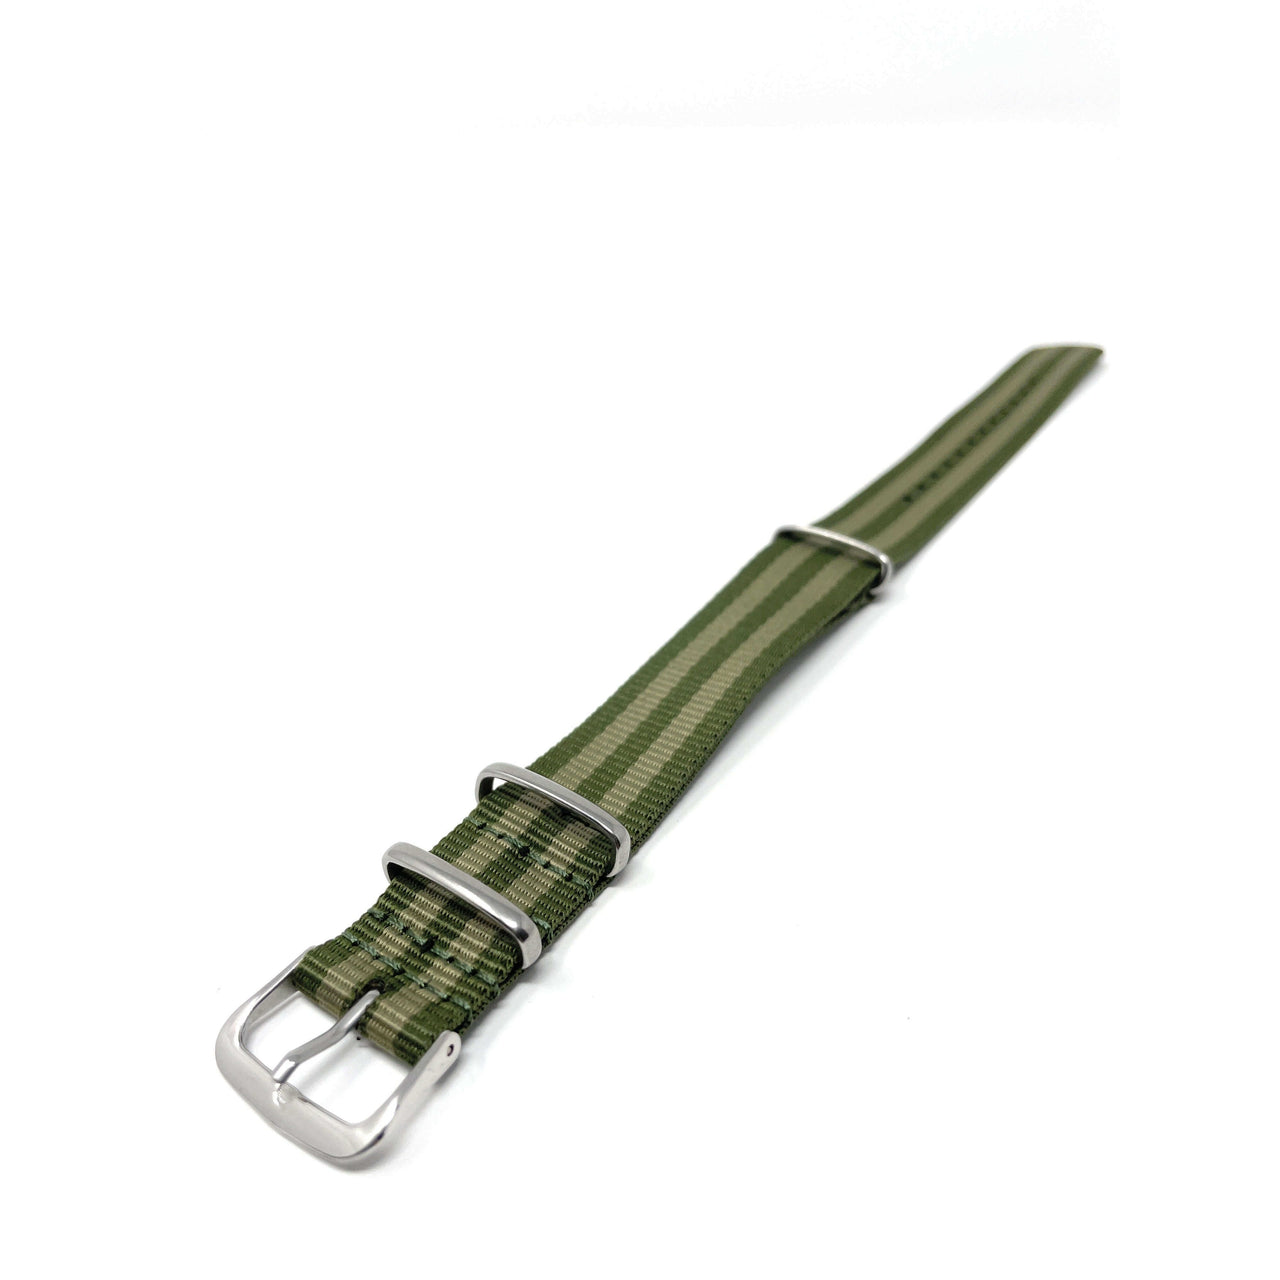 Classic Military Style Strap -Olive Green and Khaki